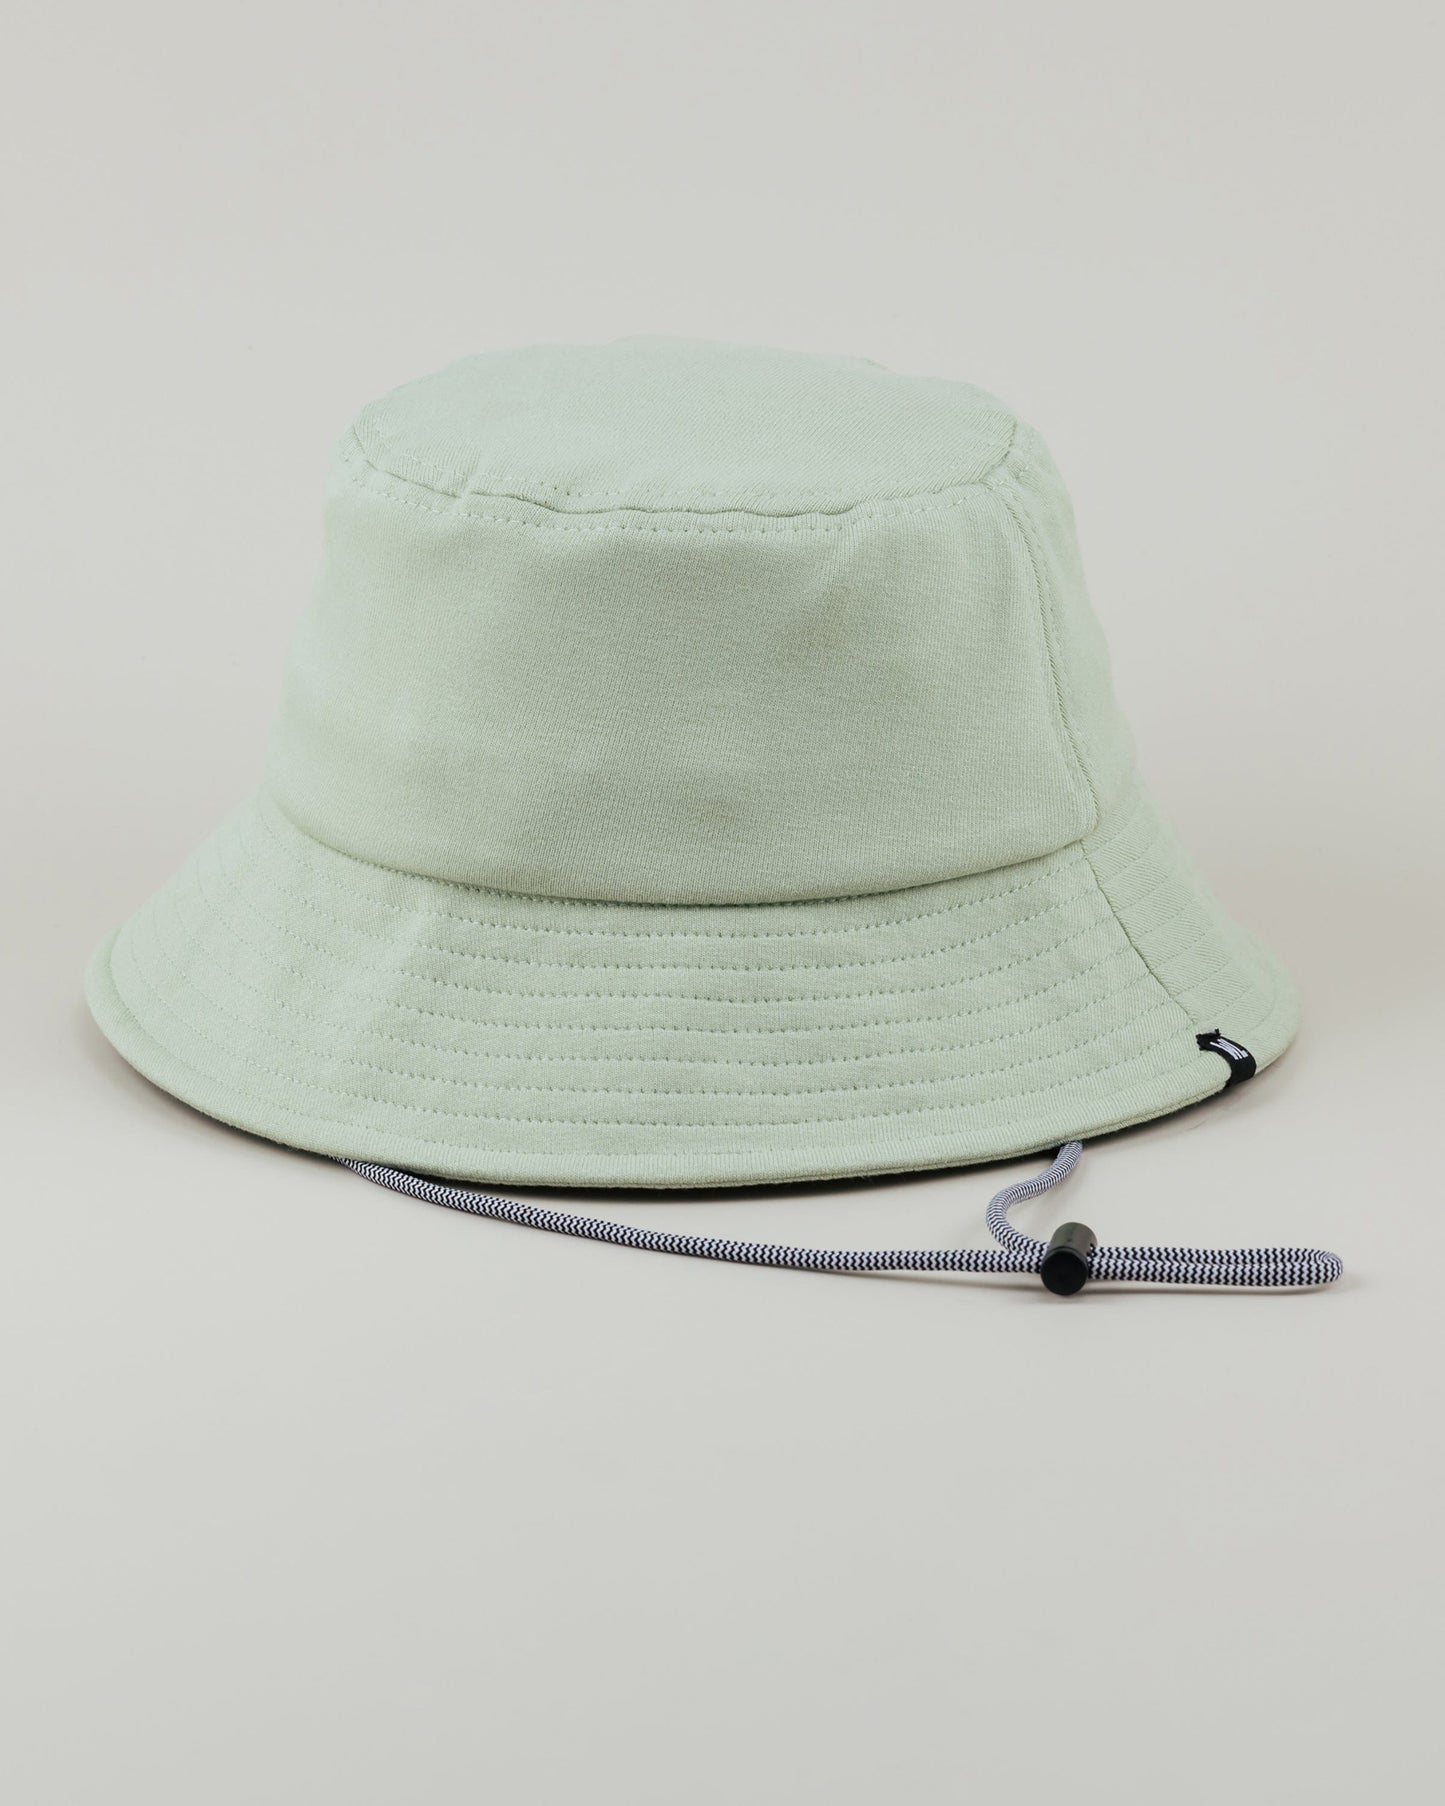 The Wrap Life Solid Bucket Hat in Sage Green Hat